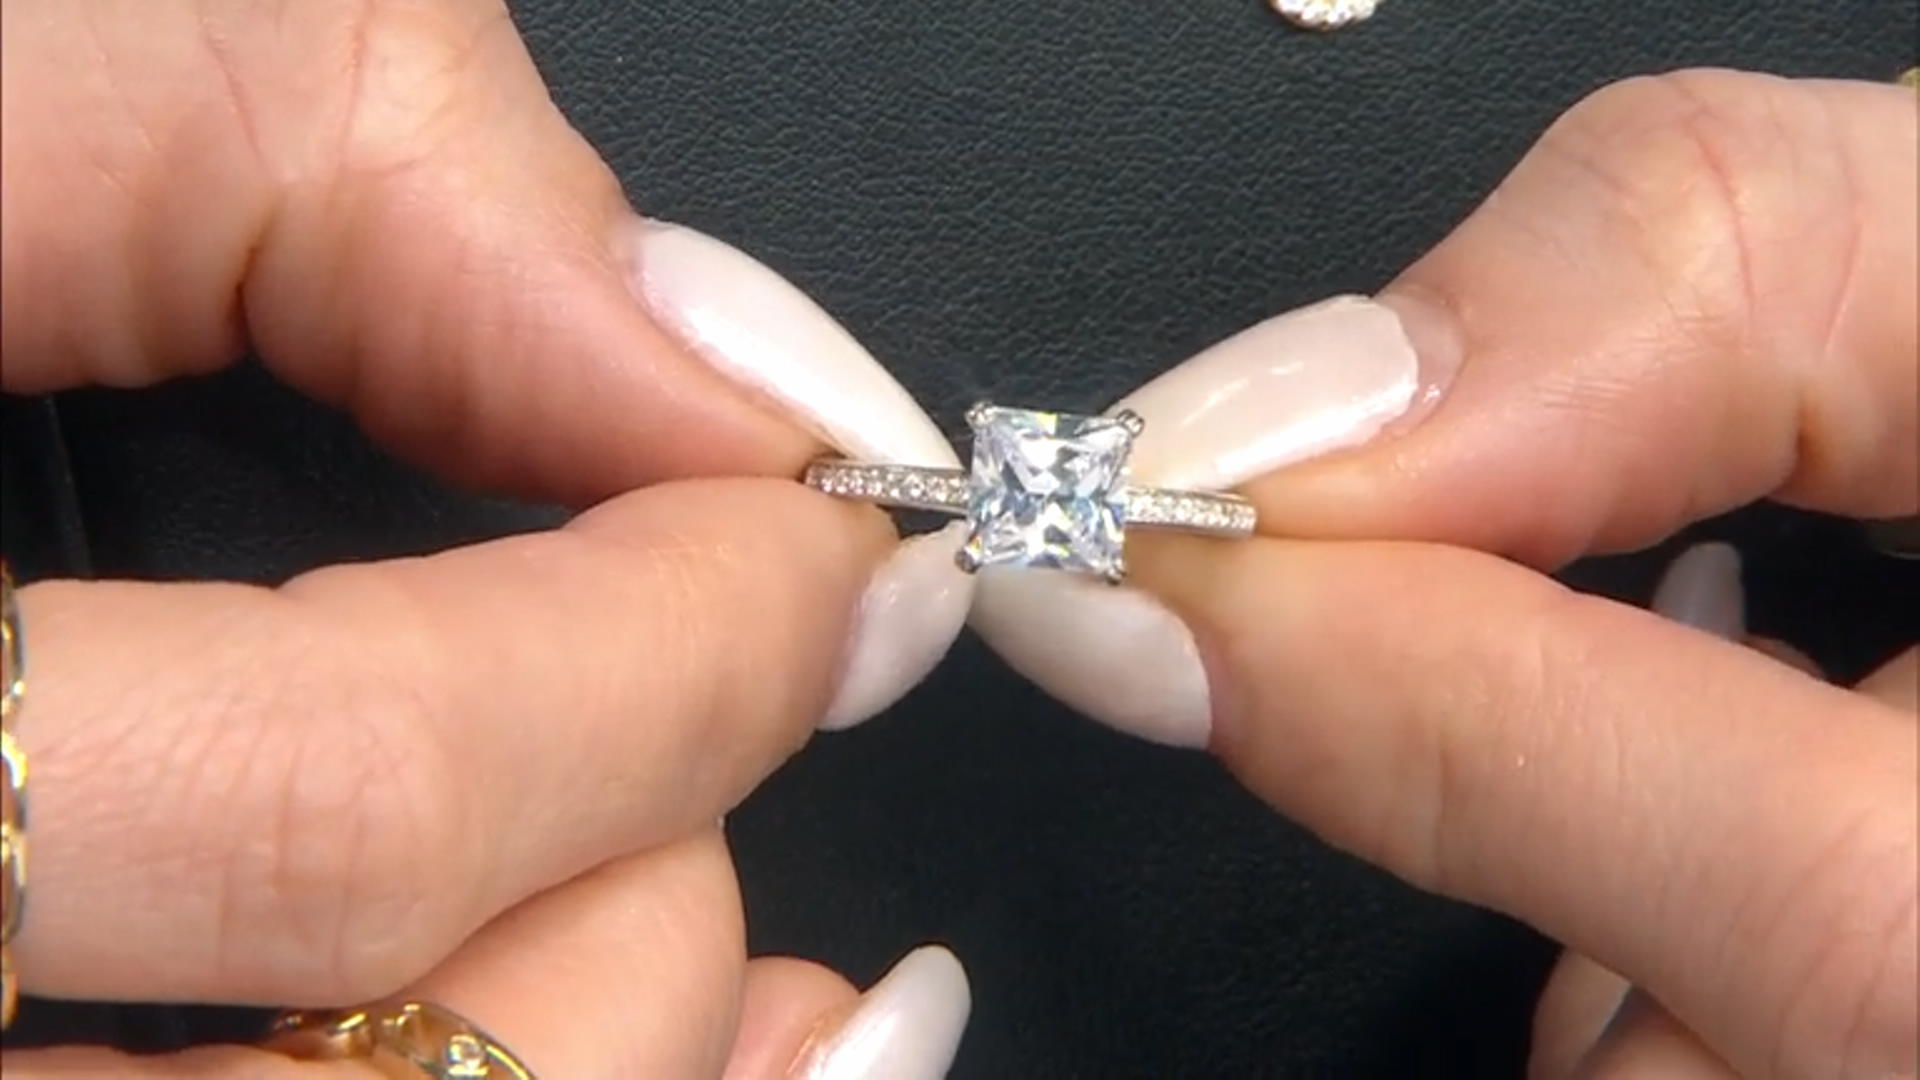 White Cubic Zirconia Platinum Over Sterling Silver Ring 2.85ctw Video Thumbnail